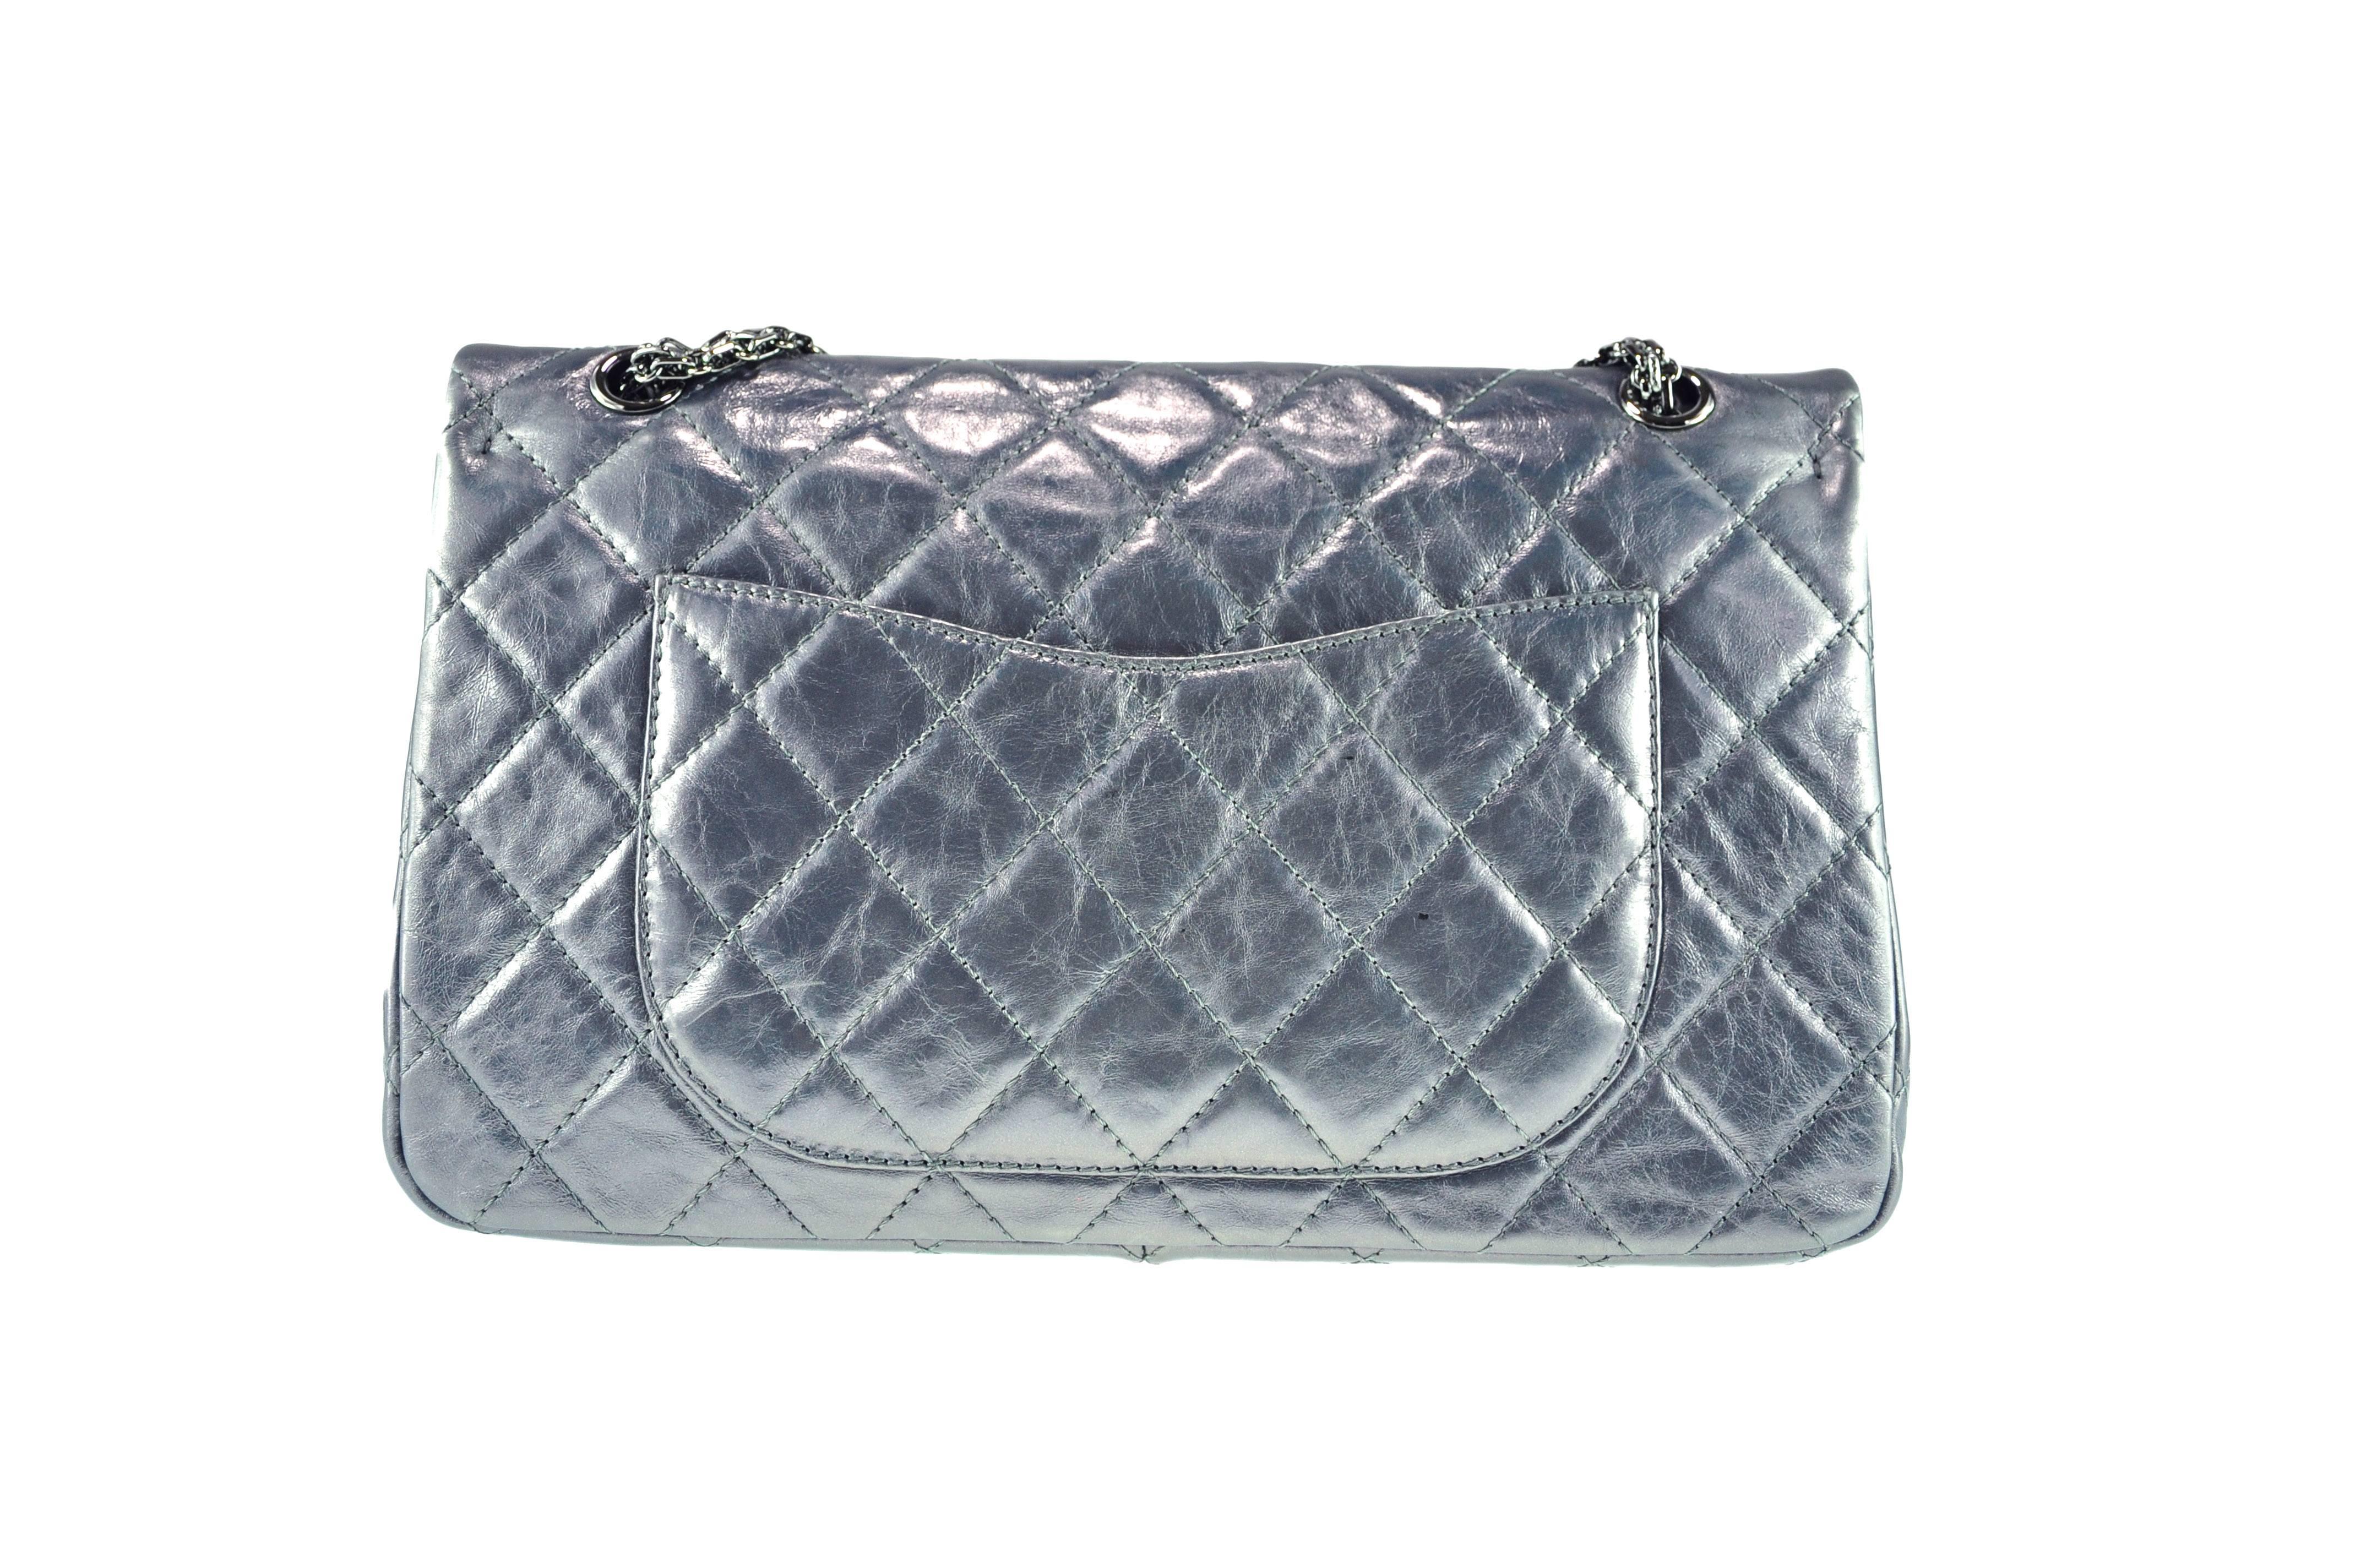 Chanel 2.55 Re-issue Metallic Silver Grey Jumbo Double Flap Leather Bag In Excellent Condition In Hong Kong, Hong Kong